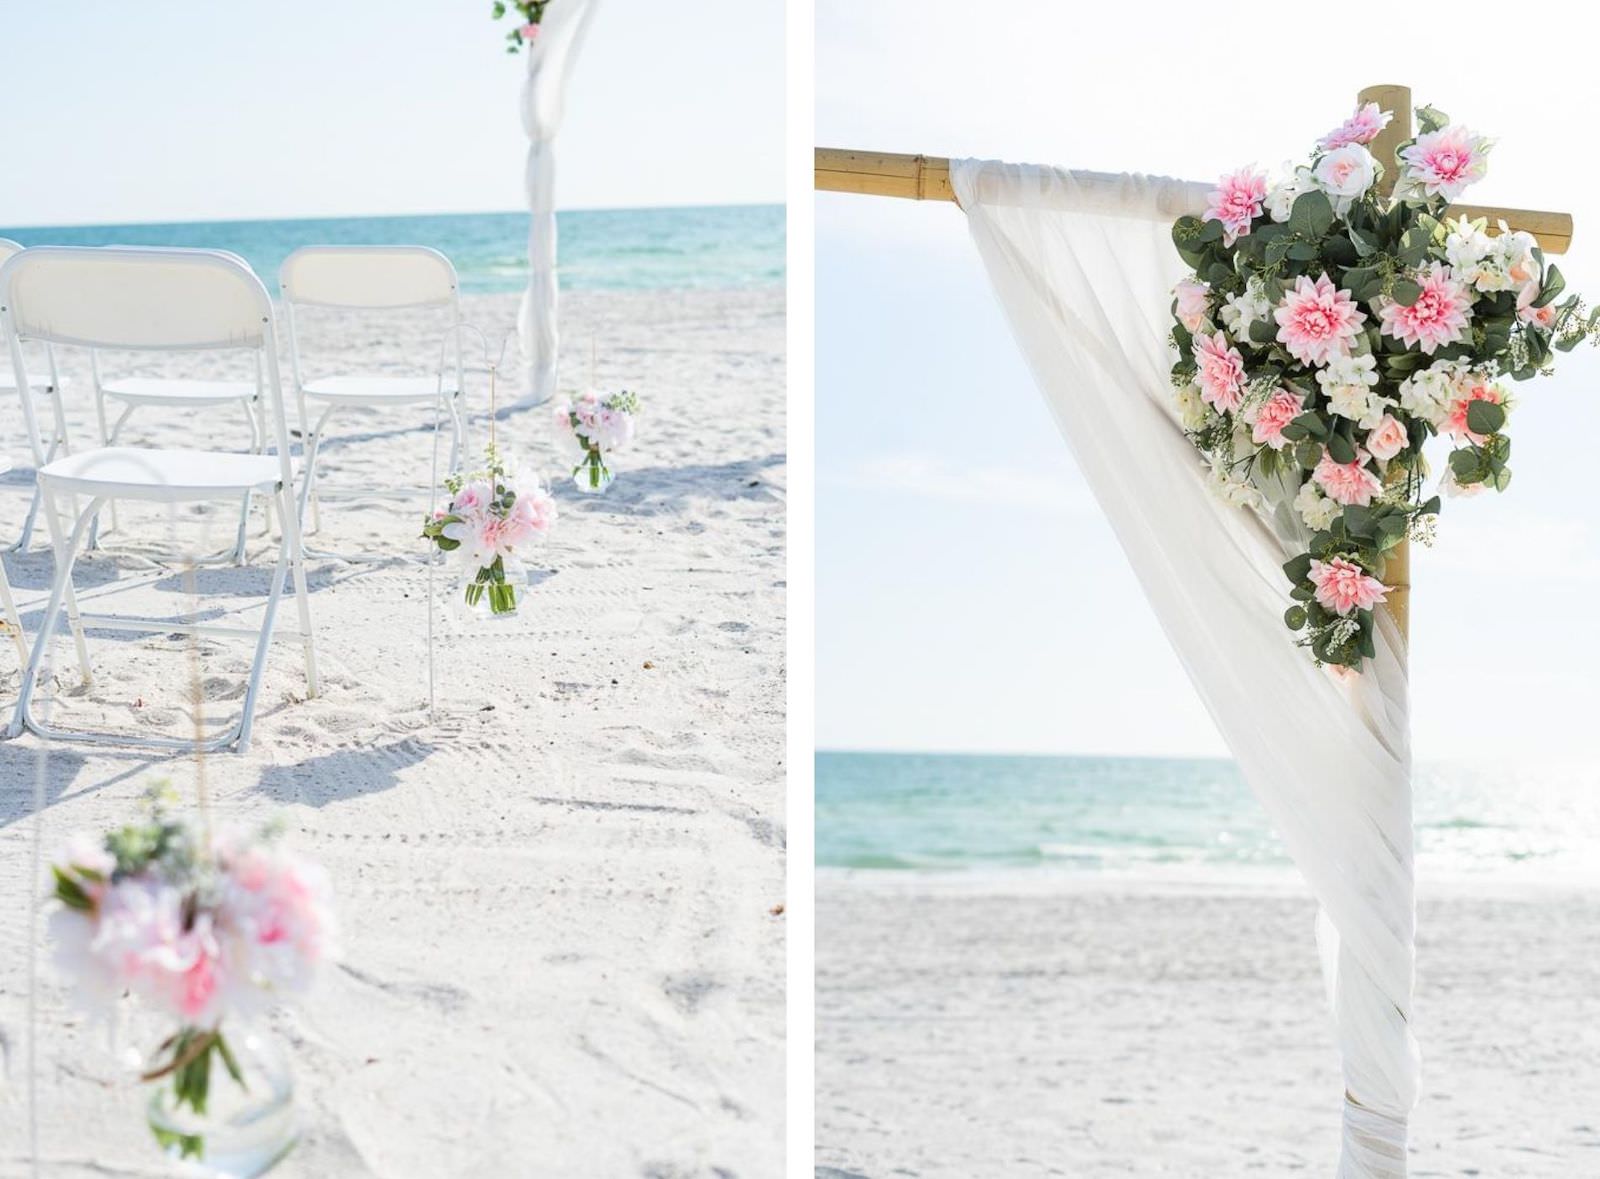 St. Petersburg Florida Beach Wedding Ceremony | Bamboo Arch Backdrop with Sheer White Draping and Blush Pink Floral Arrangements | White Ceremony Chairs with Blush Pink Aisle Flowers